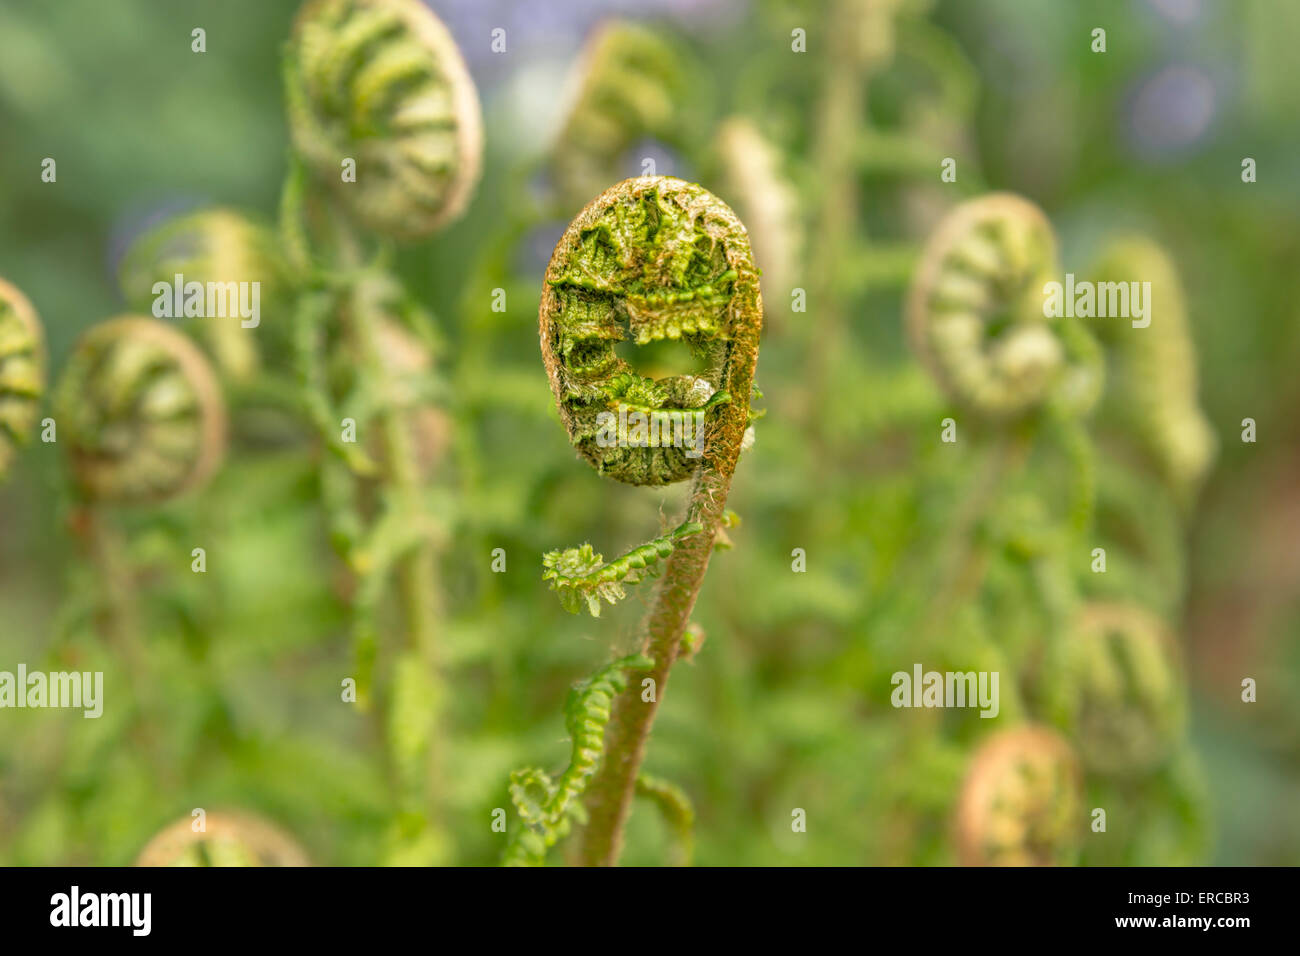 Macro of a fern curl in the Quarry Garden at Standen House, East Grinstead, West Sussex, England, United Kingdom. Stock Photo